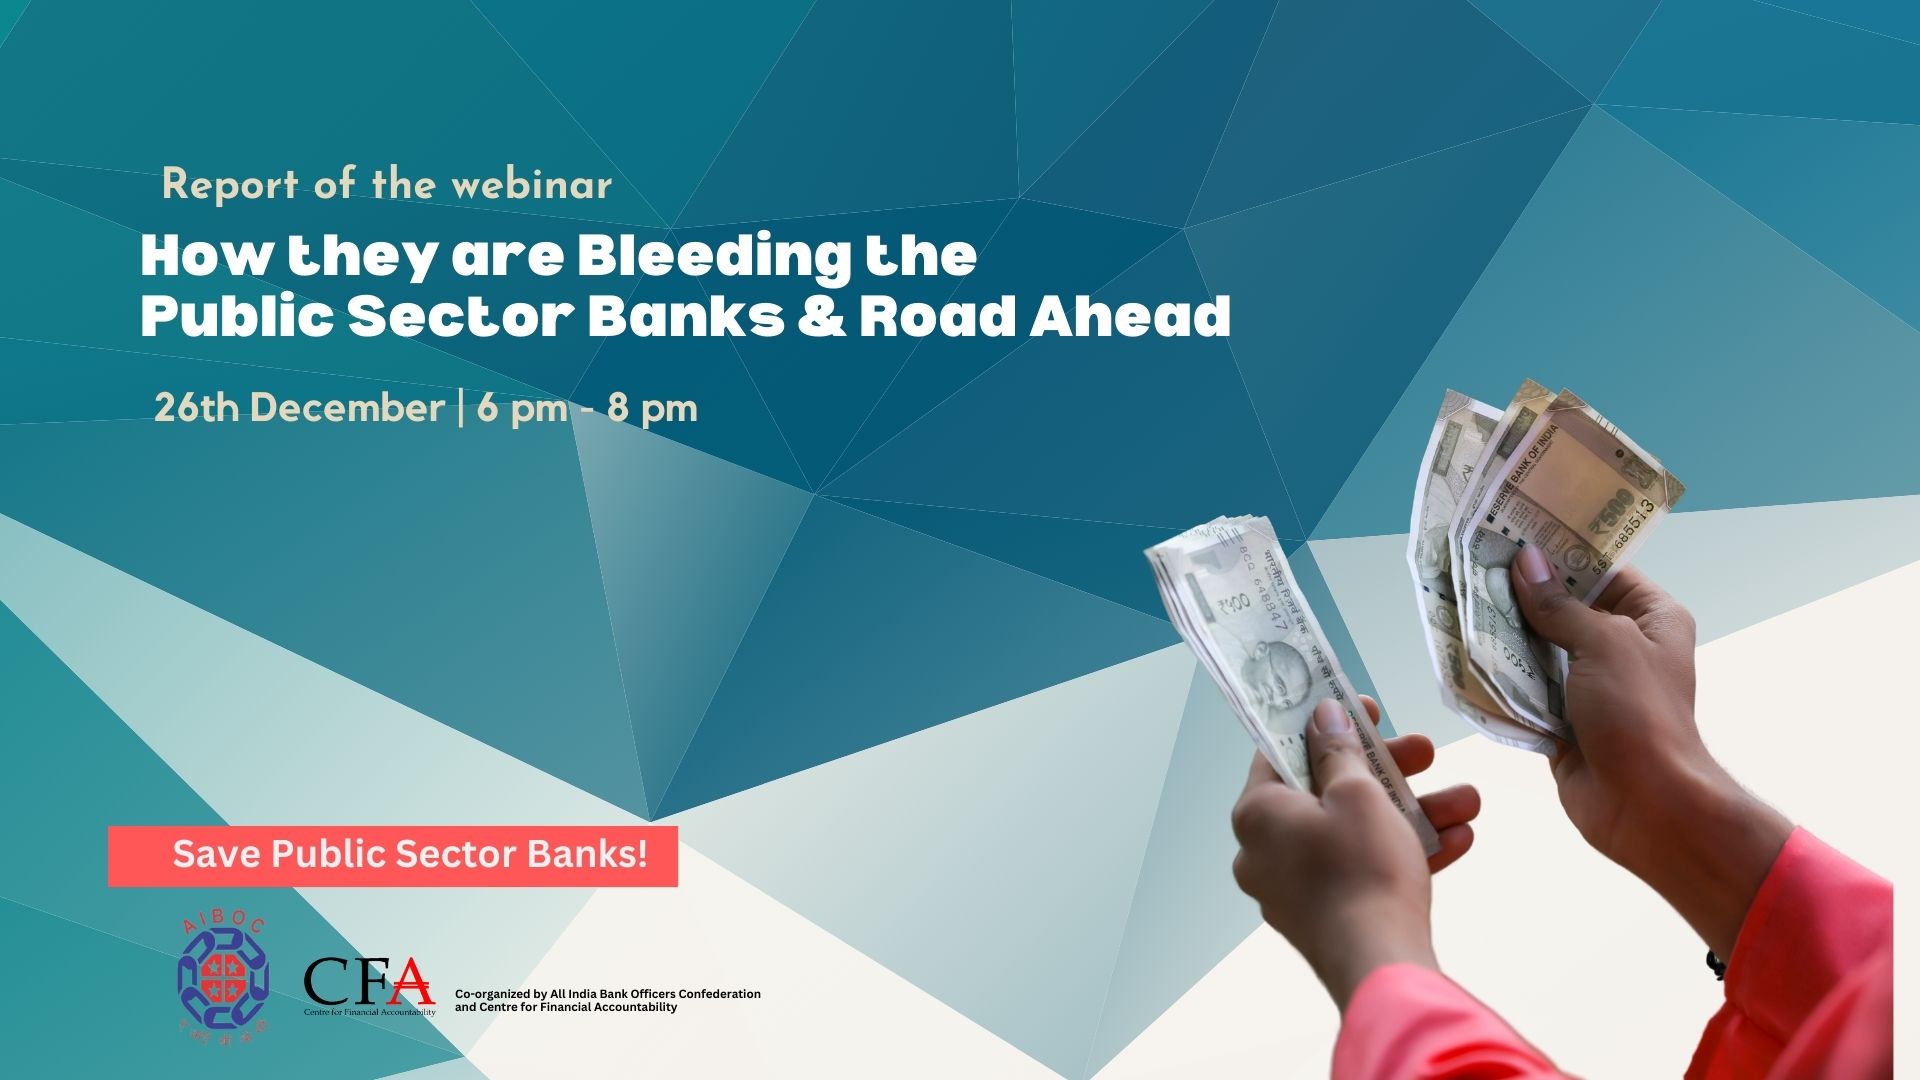 How they are Bleeding the Public Sector Banks & Road Ahead